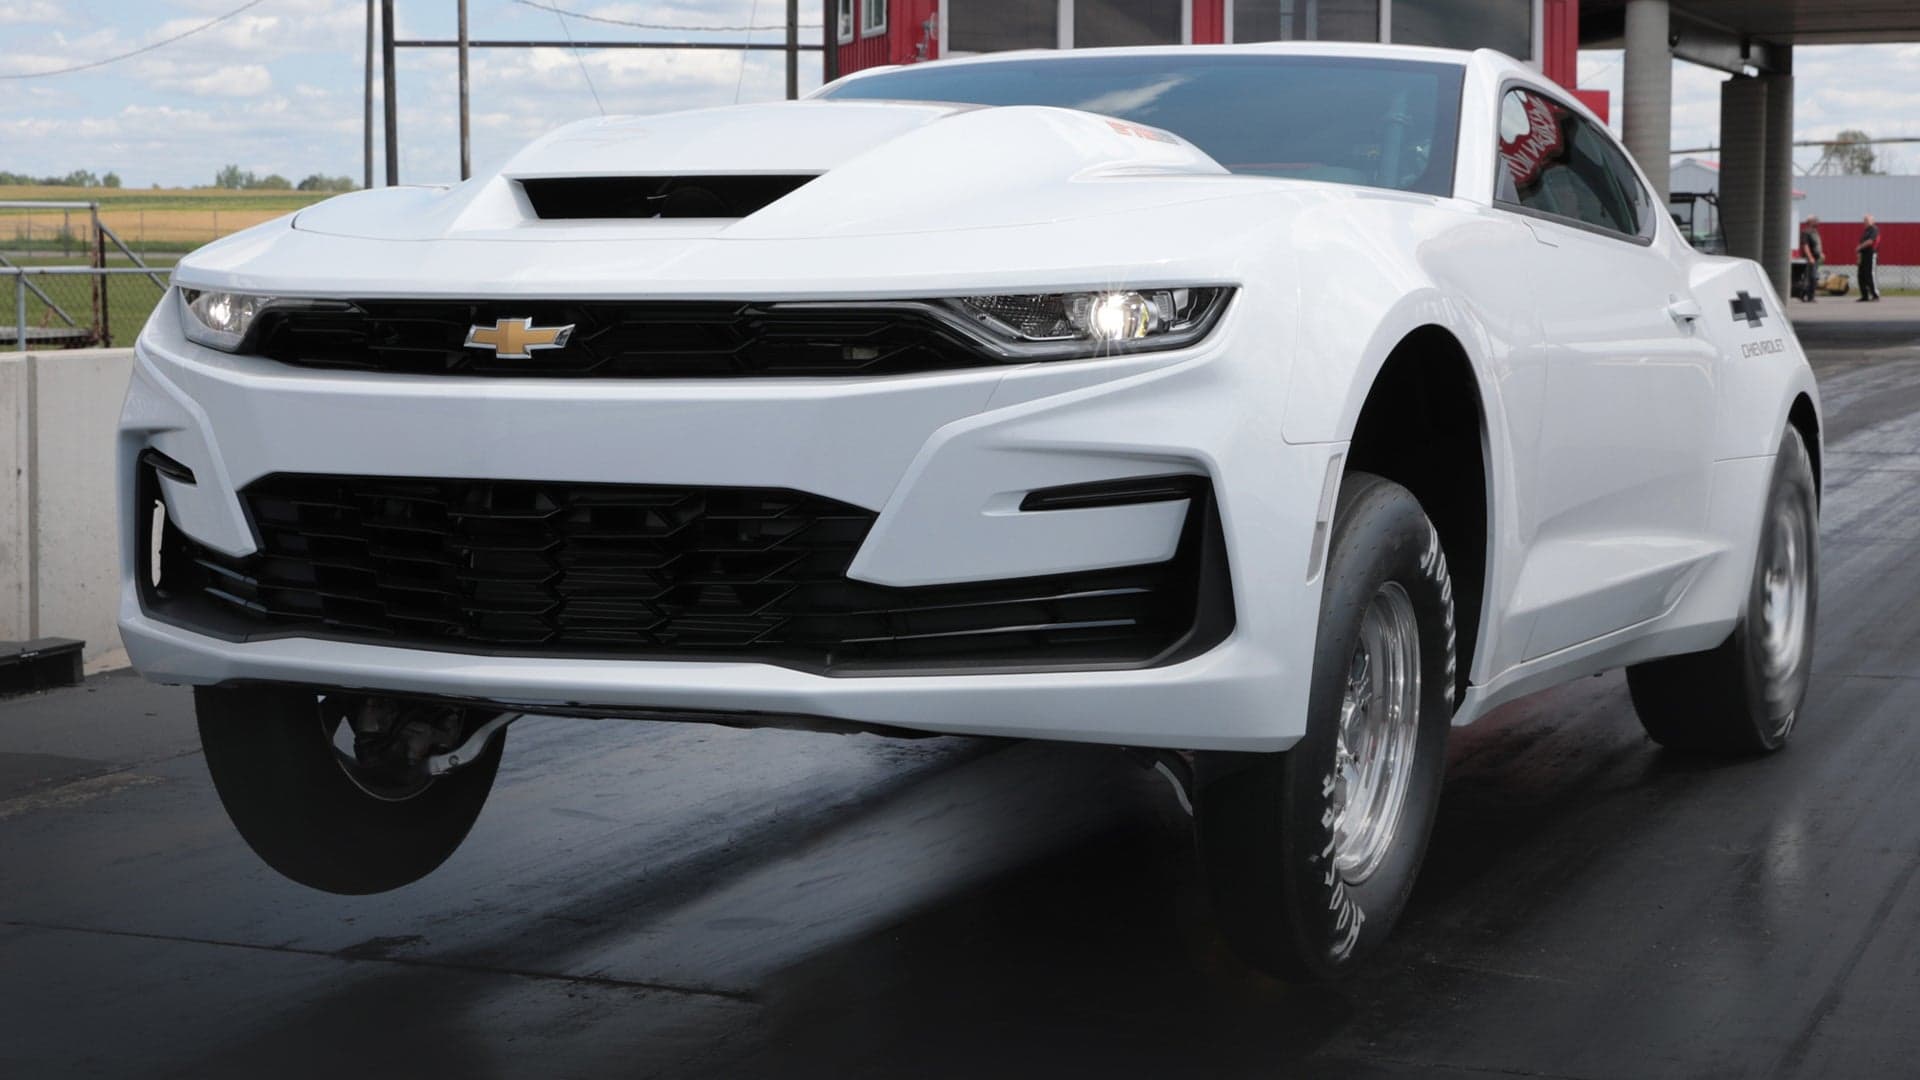 2022 Chevrolet COPO Camaro Unveiled With Biggest V8 From Any American Automaker